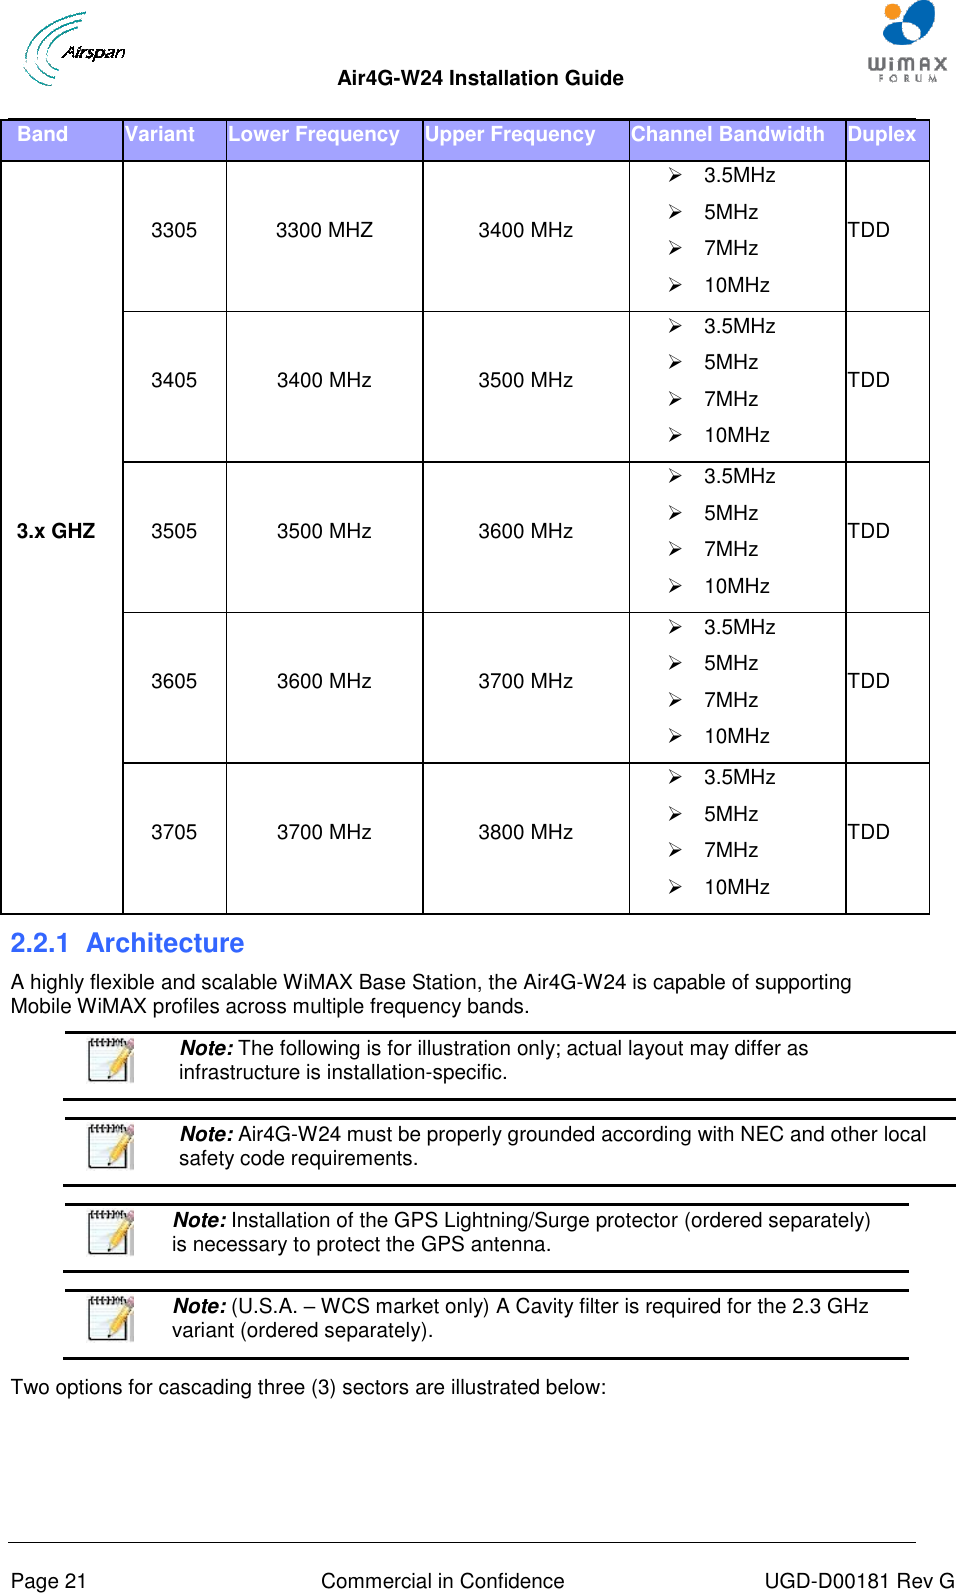  Air4G-W24 Installation Guide     Page 21  Commercial in Confidence  UGD-D00181 Rev G Band Variant Lower Frequency Upper Frequency Channel Bandwidth Duplex 3.x GHZ 3305 3300 MHZ 3400 MHz   3.5MHz   5MHz   7MHz   10MHz TDD 3405 3400 MHz 3500 MHz   3.5MHz   5MHz   7MHz   10MHz TDD 3505 3500 MHz 3600 MHz   3.5MHz   5MHz   7MHz   10MHz TDD 3605 3600 MHz 3700 MHz   3.5MHz  5MHz   7MHz   10MHz TDD 3705 3700 MHz 3800 MHz   3.5MHz   5MHz   7MHz   10MHz TDD 2.2.1  Architecture A highly flexible and scalable WiMAX Base Station, the Air4G-W24 is capable of supporting Mobile WiMAX profiles across multiple frequency bands.   Note: The following is for illustration only; actual layout may differ as infrastructure is installation-specific.    Note: Air4G-W24 must be properly grounded according with NEC and other local safety code requirements.   Note: Installation of the GPS Lightning/Surge protector (ordered separately) is necessary to protect the GPS antenna.   Note: (U.S.A. – WCS market only) A Cavity filter is required for the 2.3 GHz variant (ordered separately).  Two options for cascading three (3) sectors are illustrated below: 